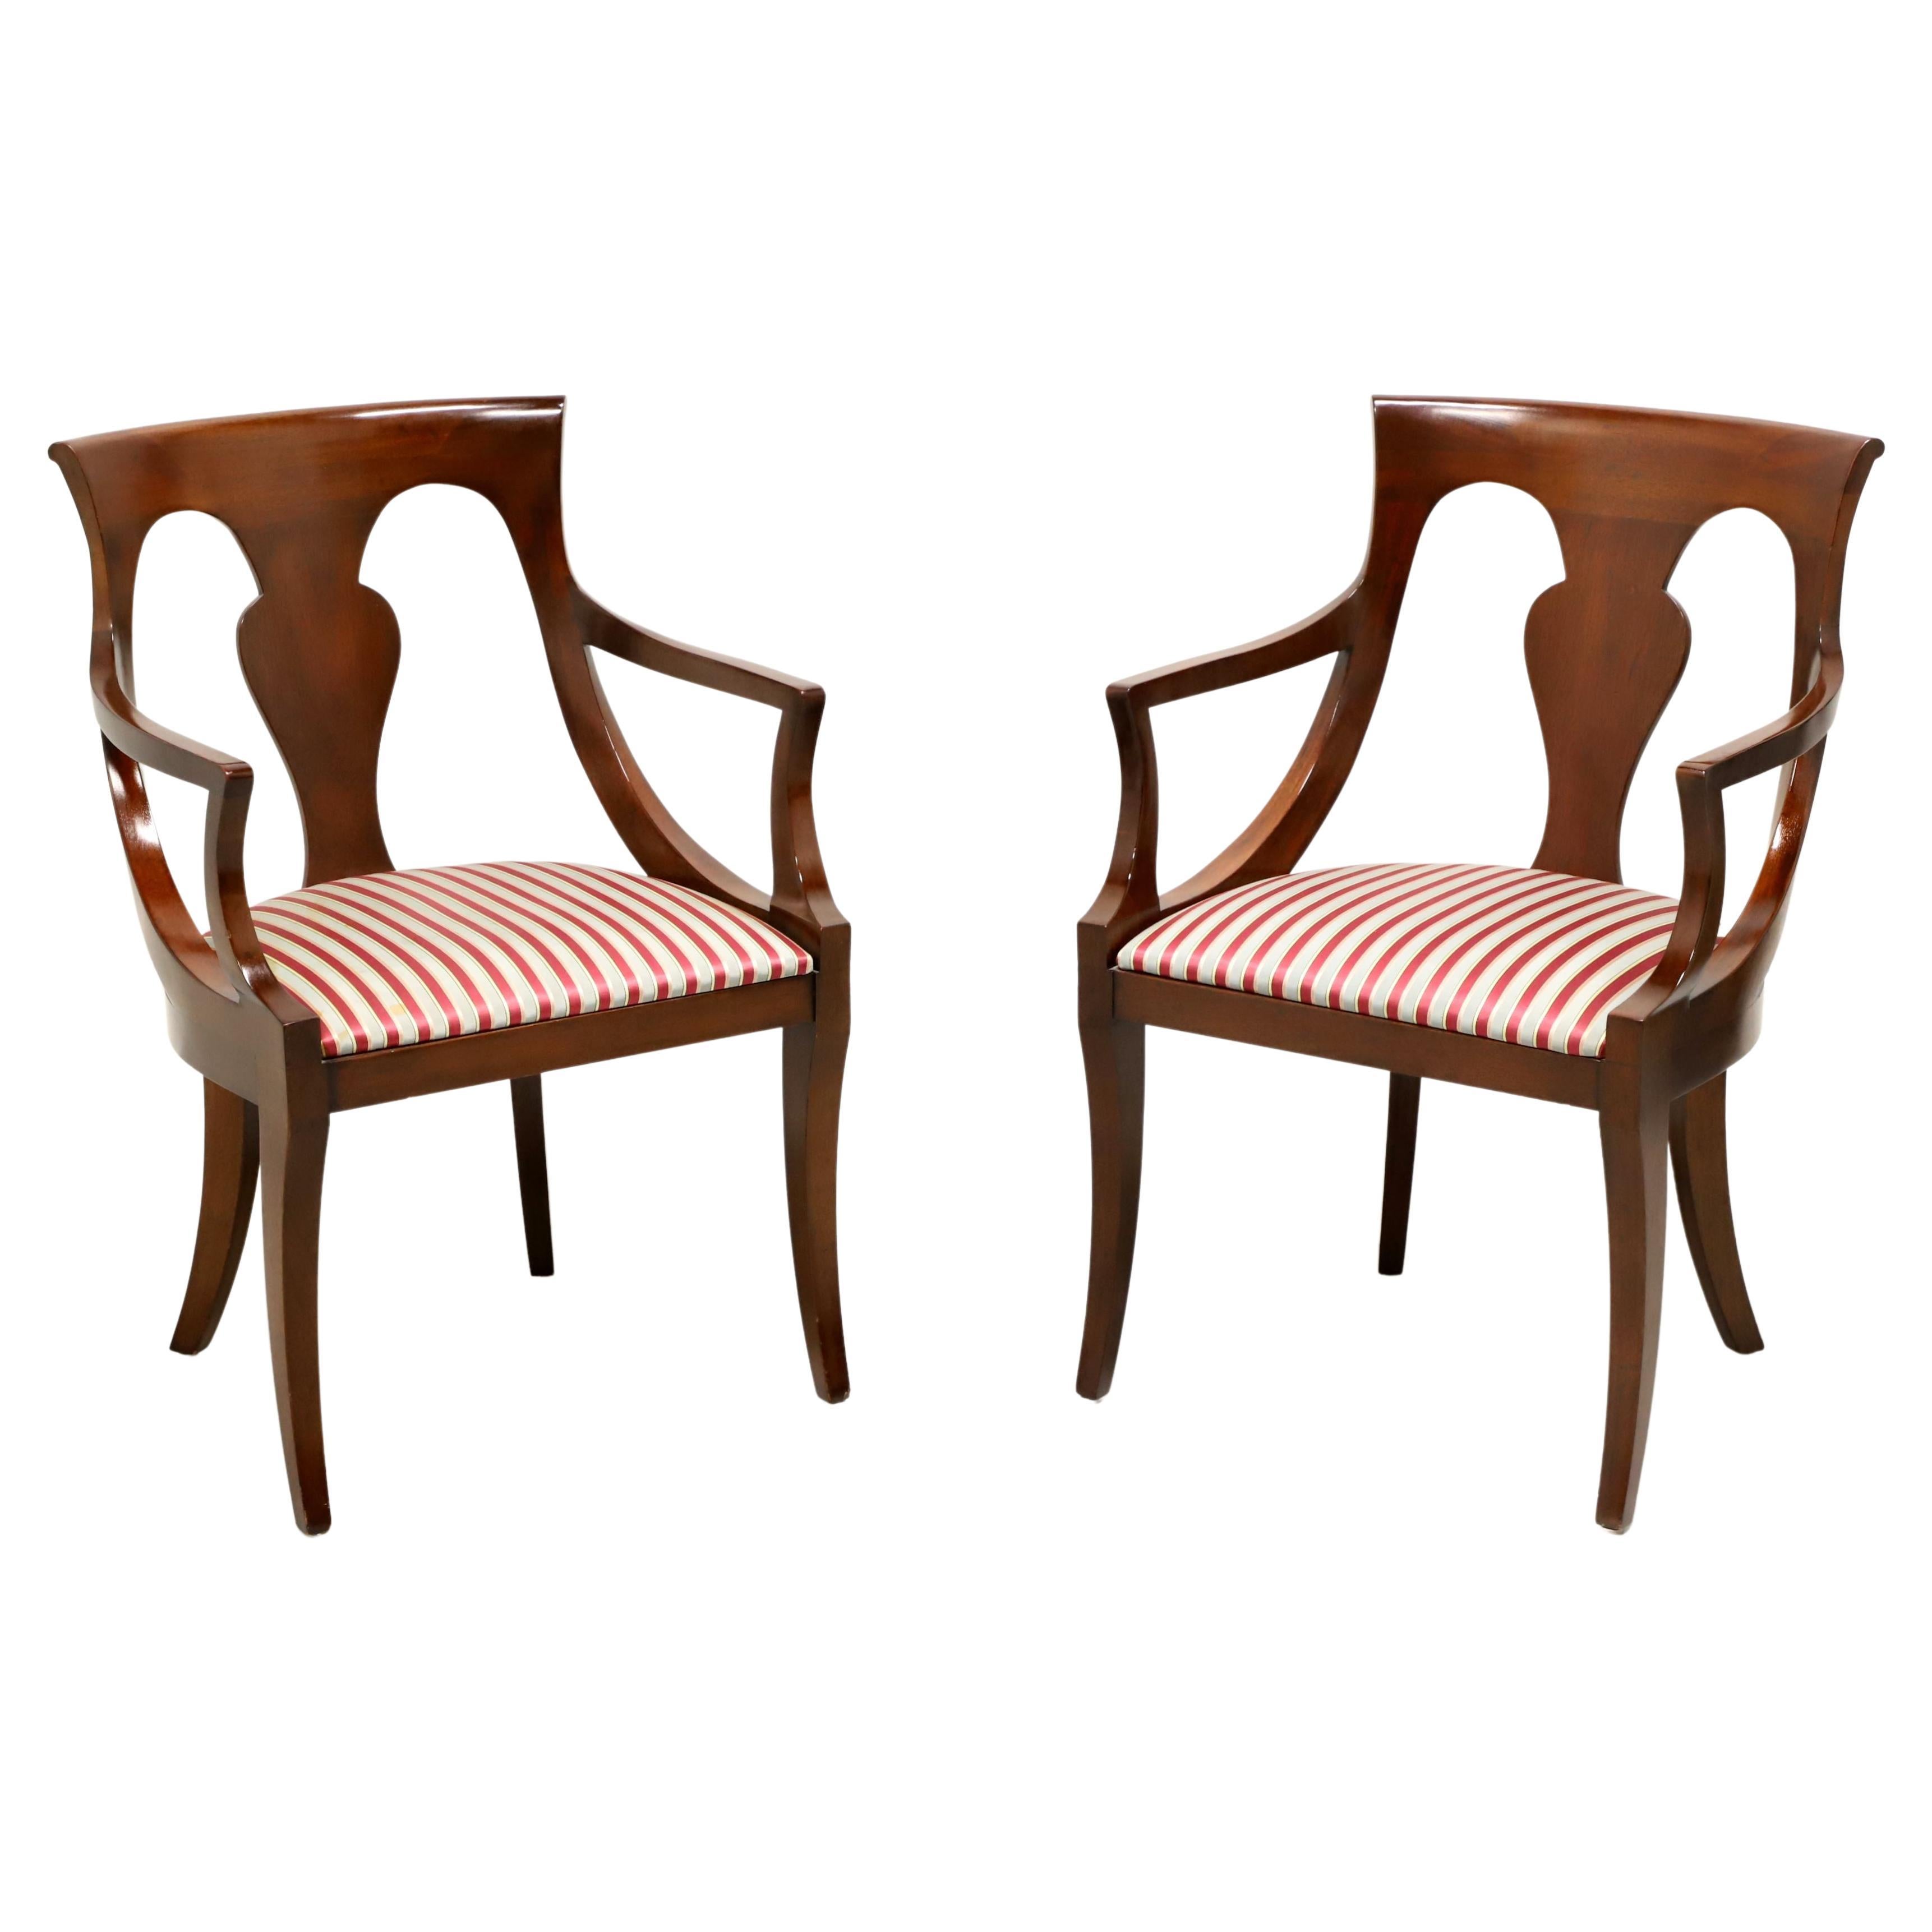 DREXEL HERITAGE Mahogany Empire Style Dining Armchairs - Pair